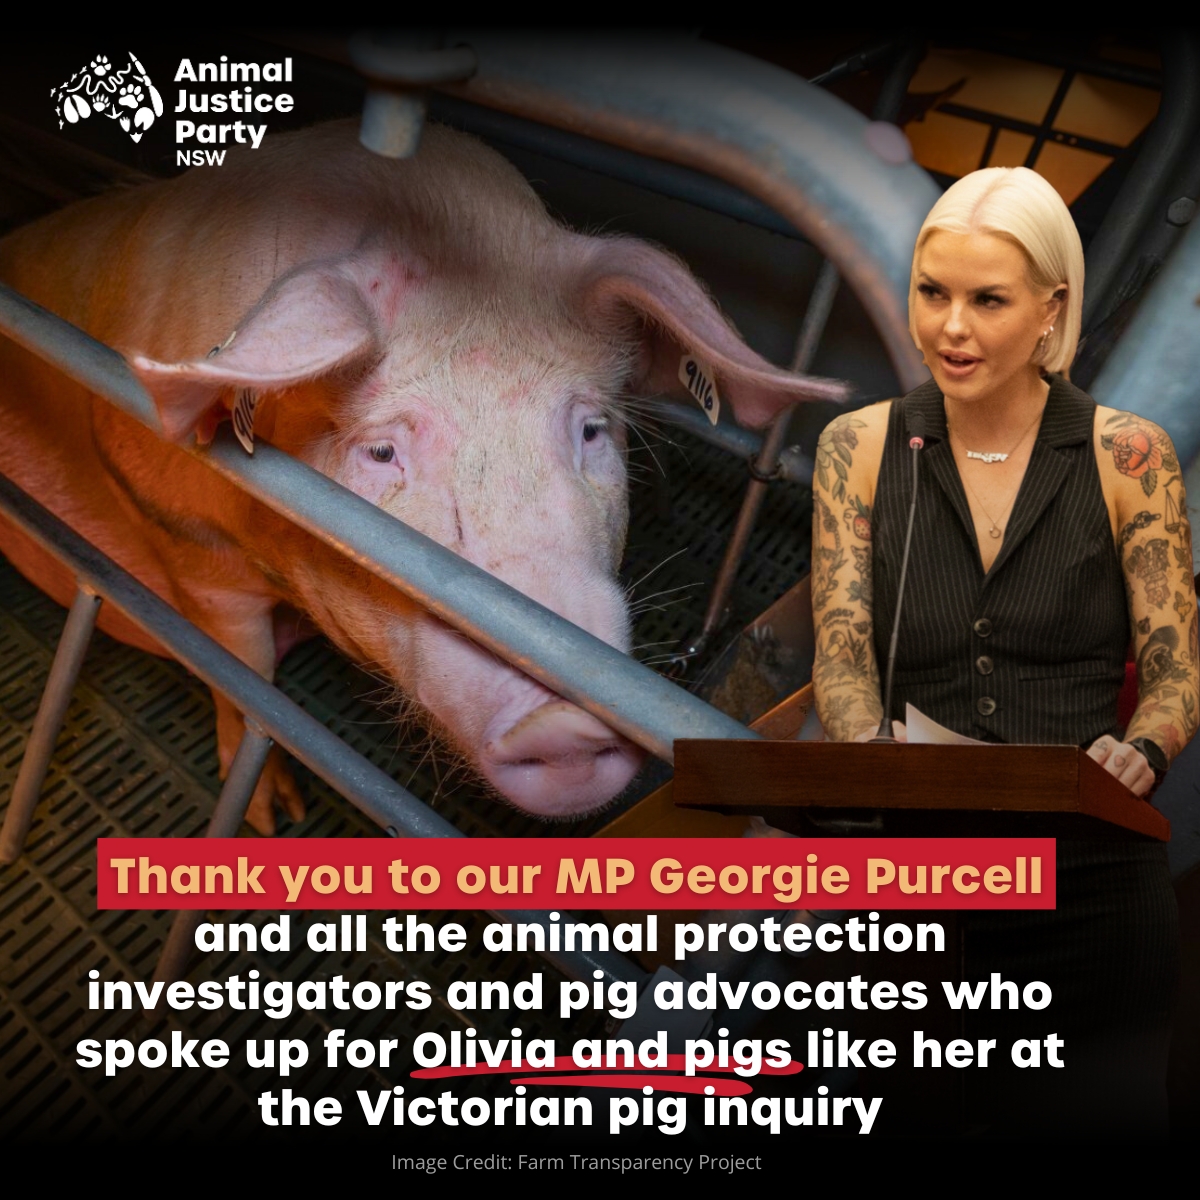 The Victorian Inquiry into Pig Welfare exposed the truth about the suffering pigs endure and the cruelty inflicted on them by the pork industry. We are grateful to those who bravely spoke for them. thank you @georgievpurcell